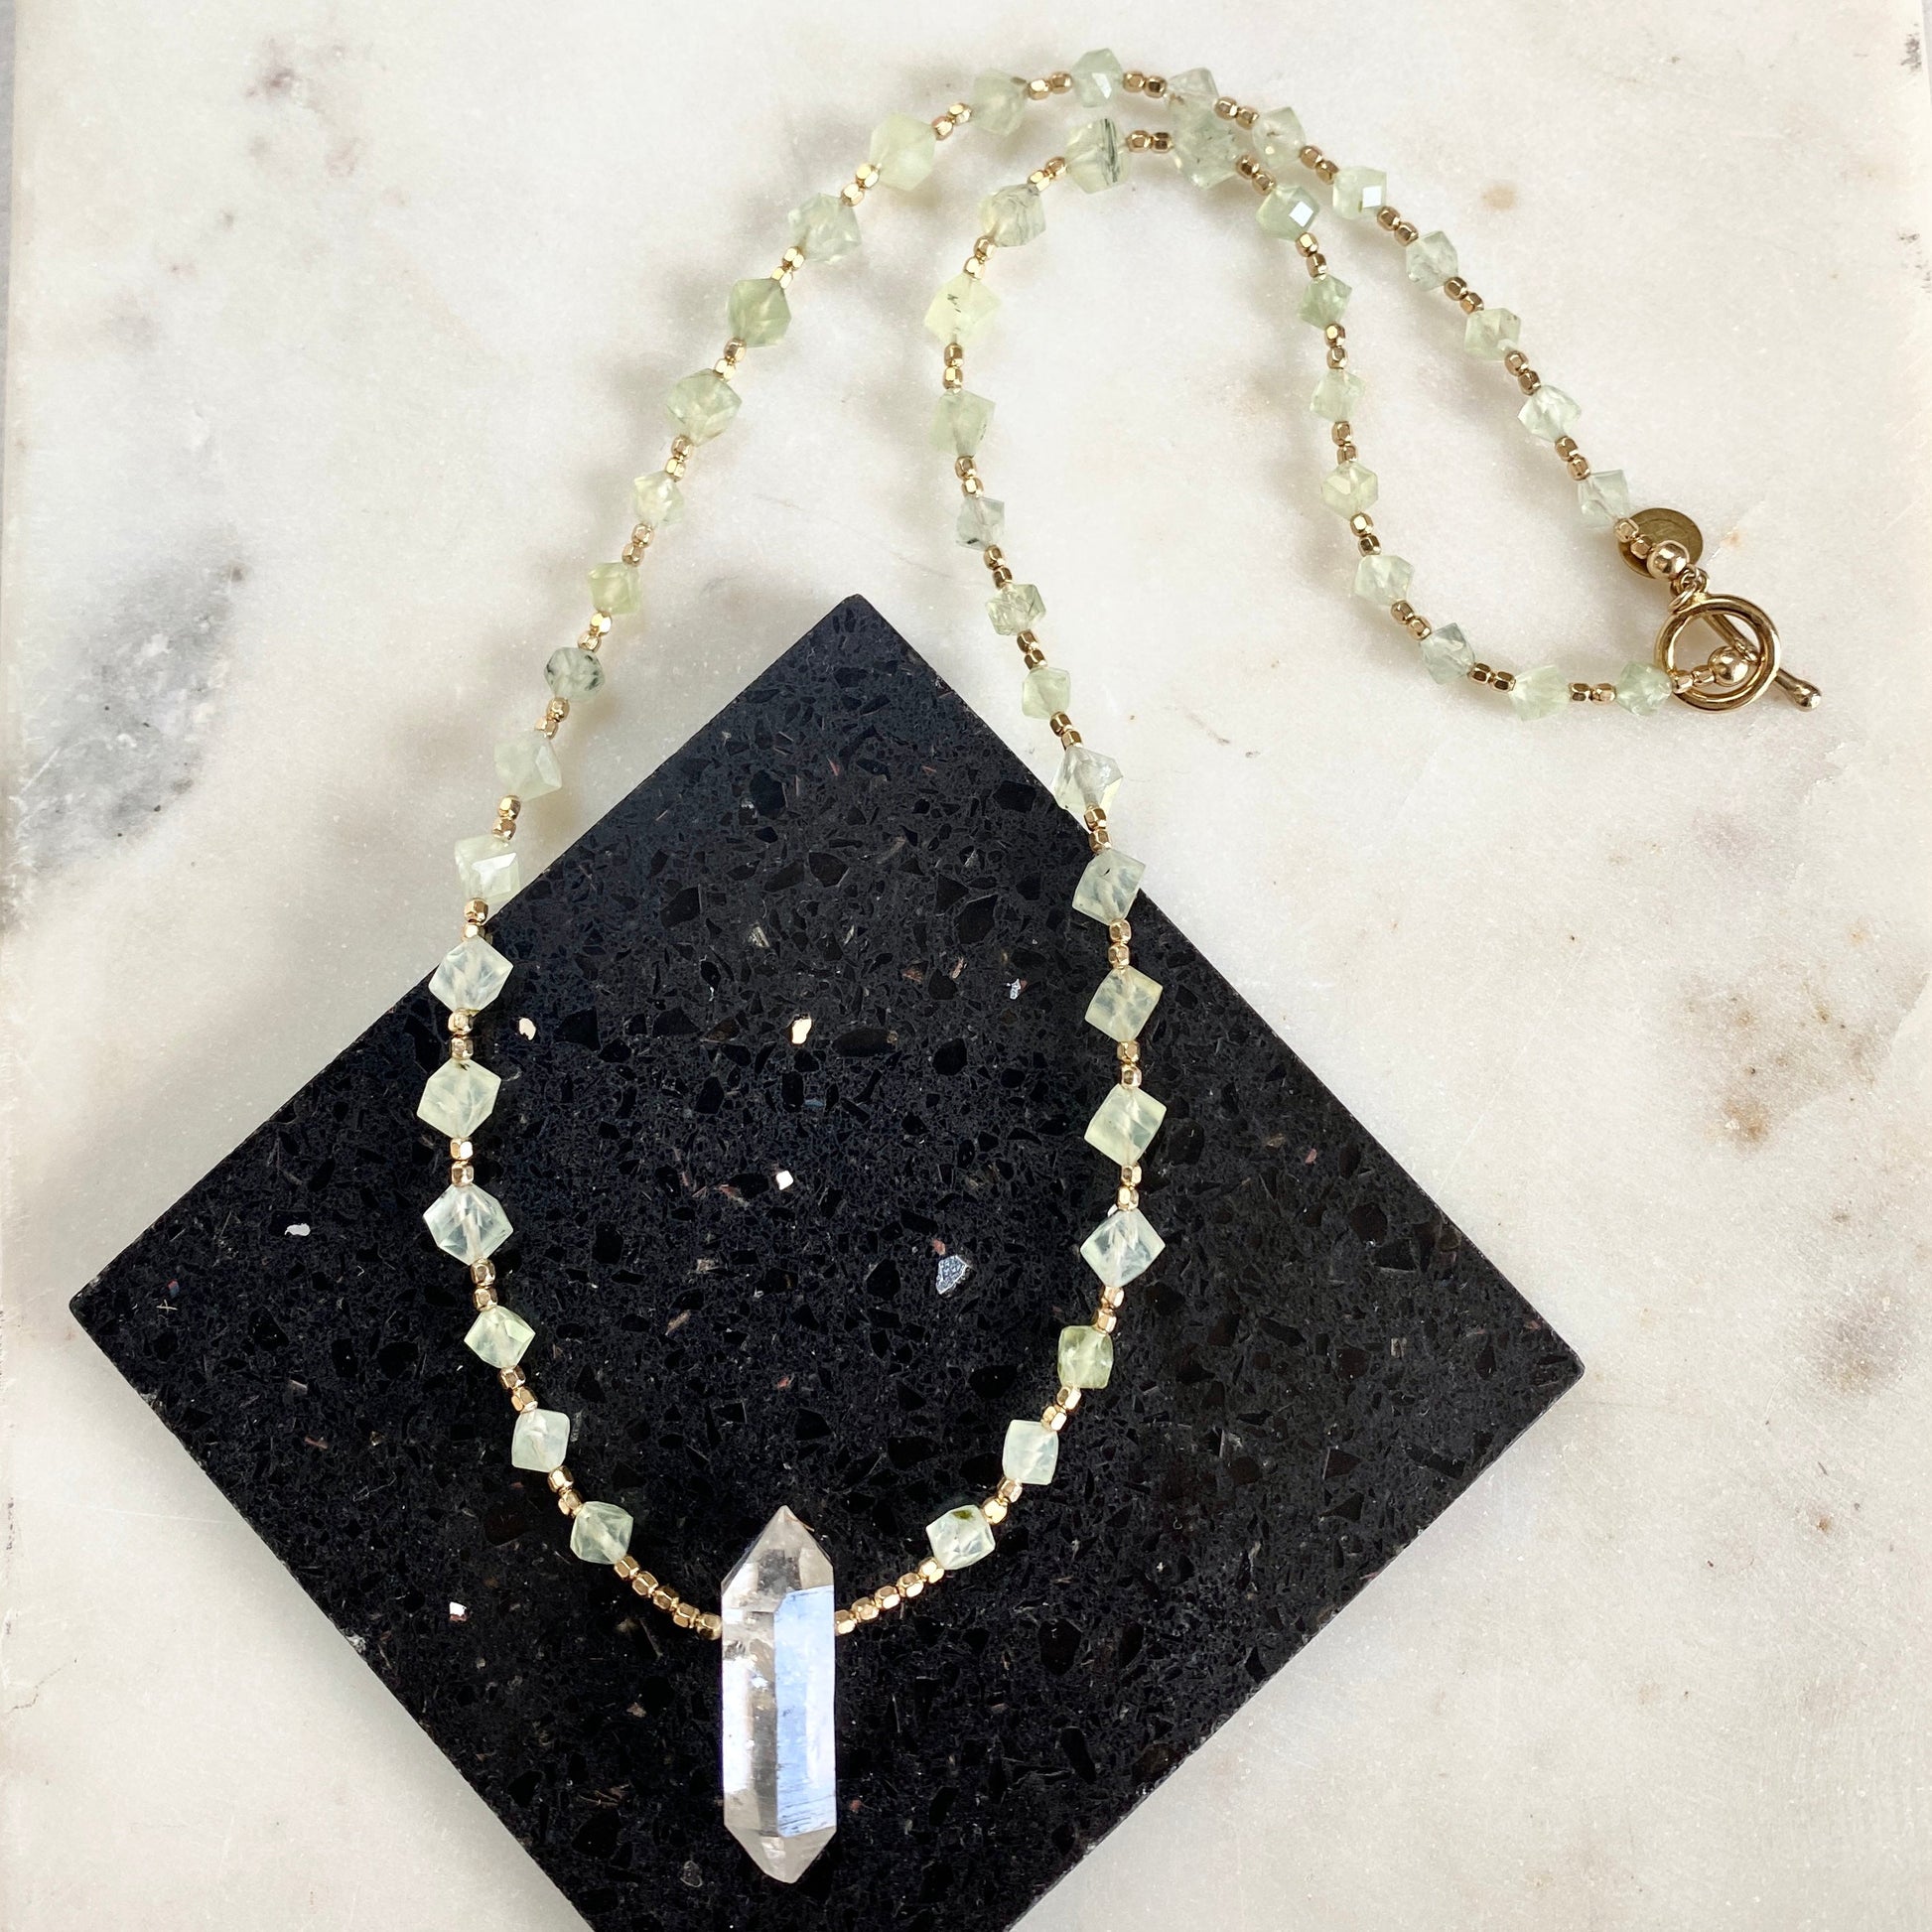 Green geometric prehnite gemstone necklace with Herkimer diamond pendant. 22.5" necklace with 14K gold toggle closure.